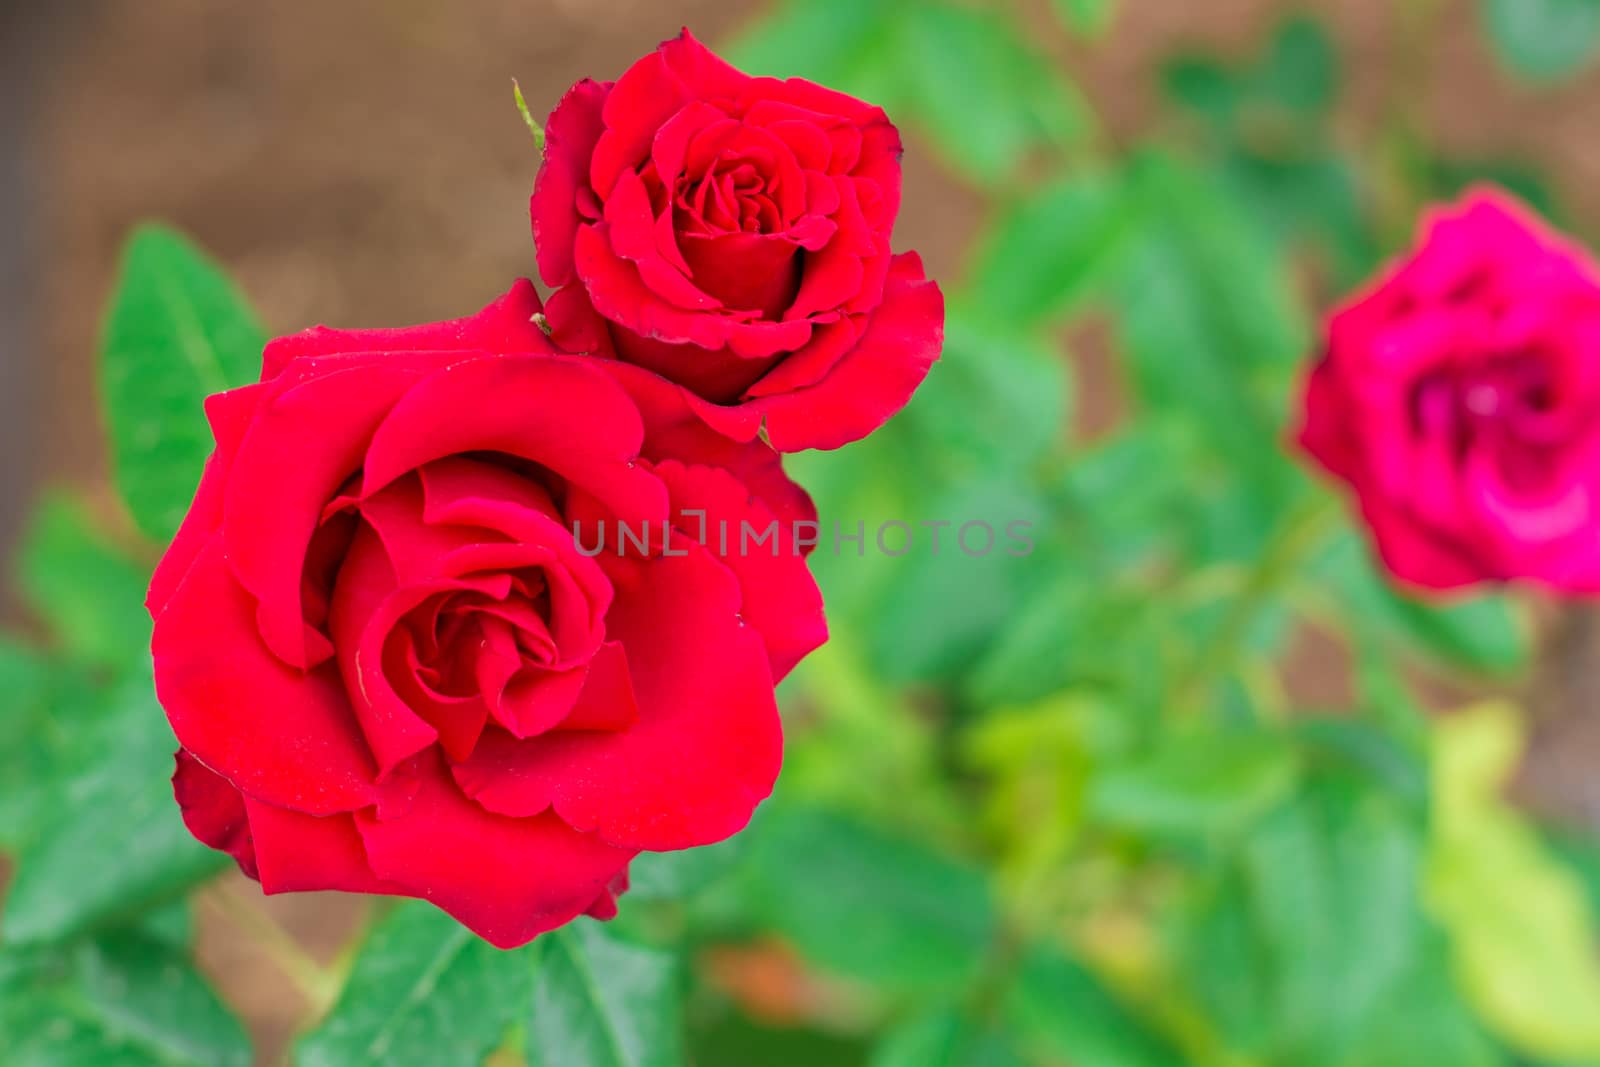 View of two red roses in the garden